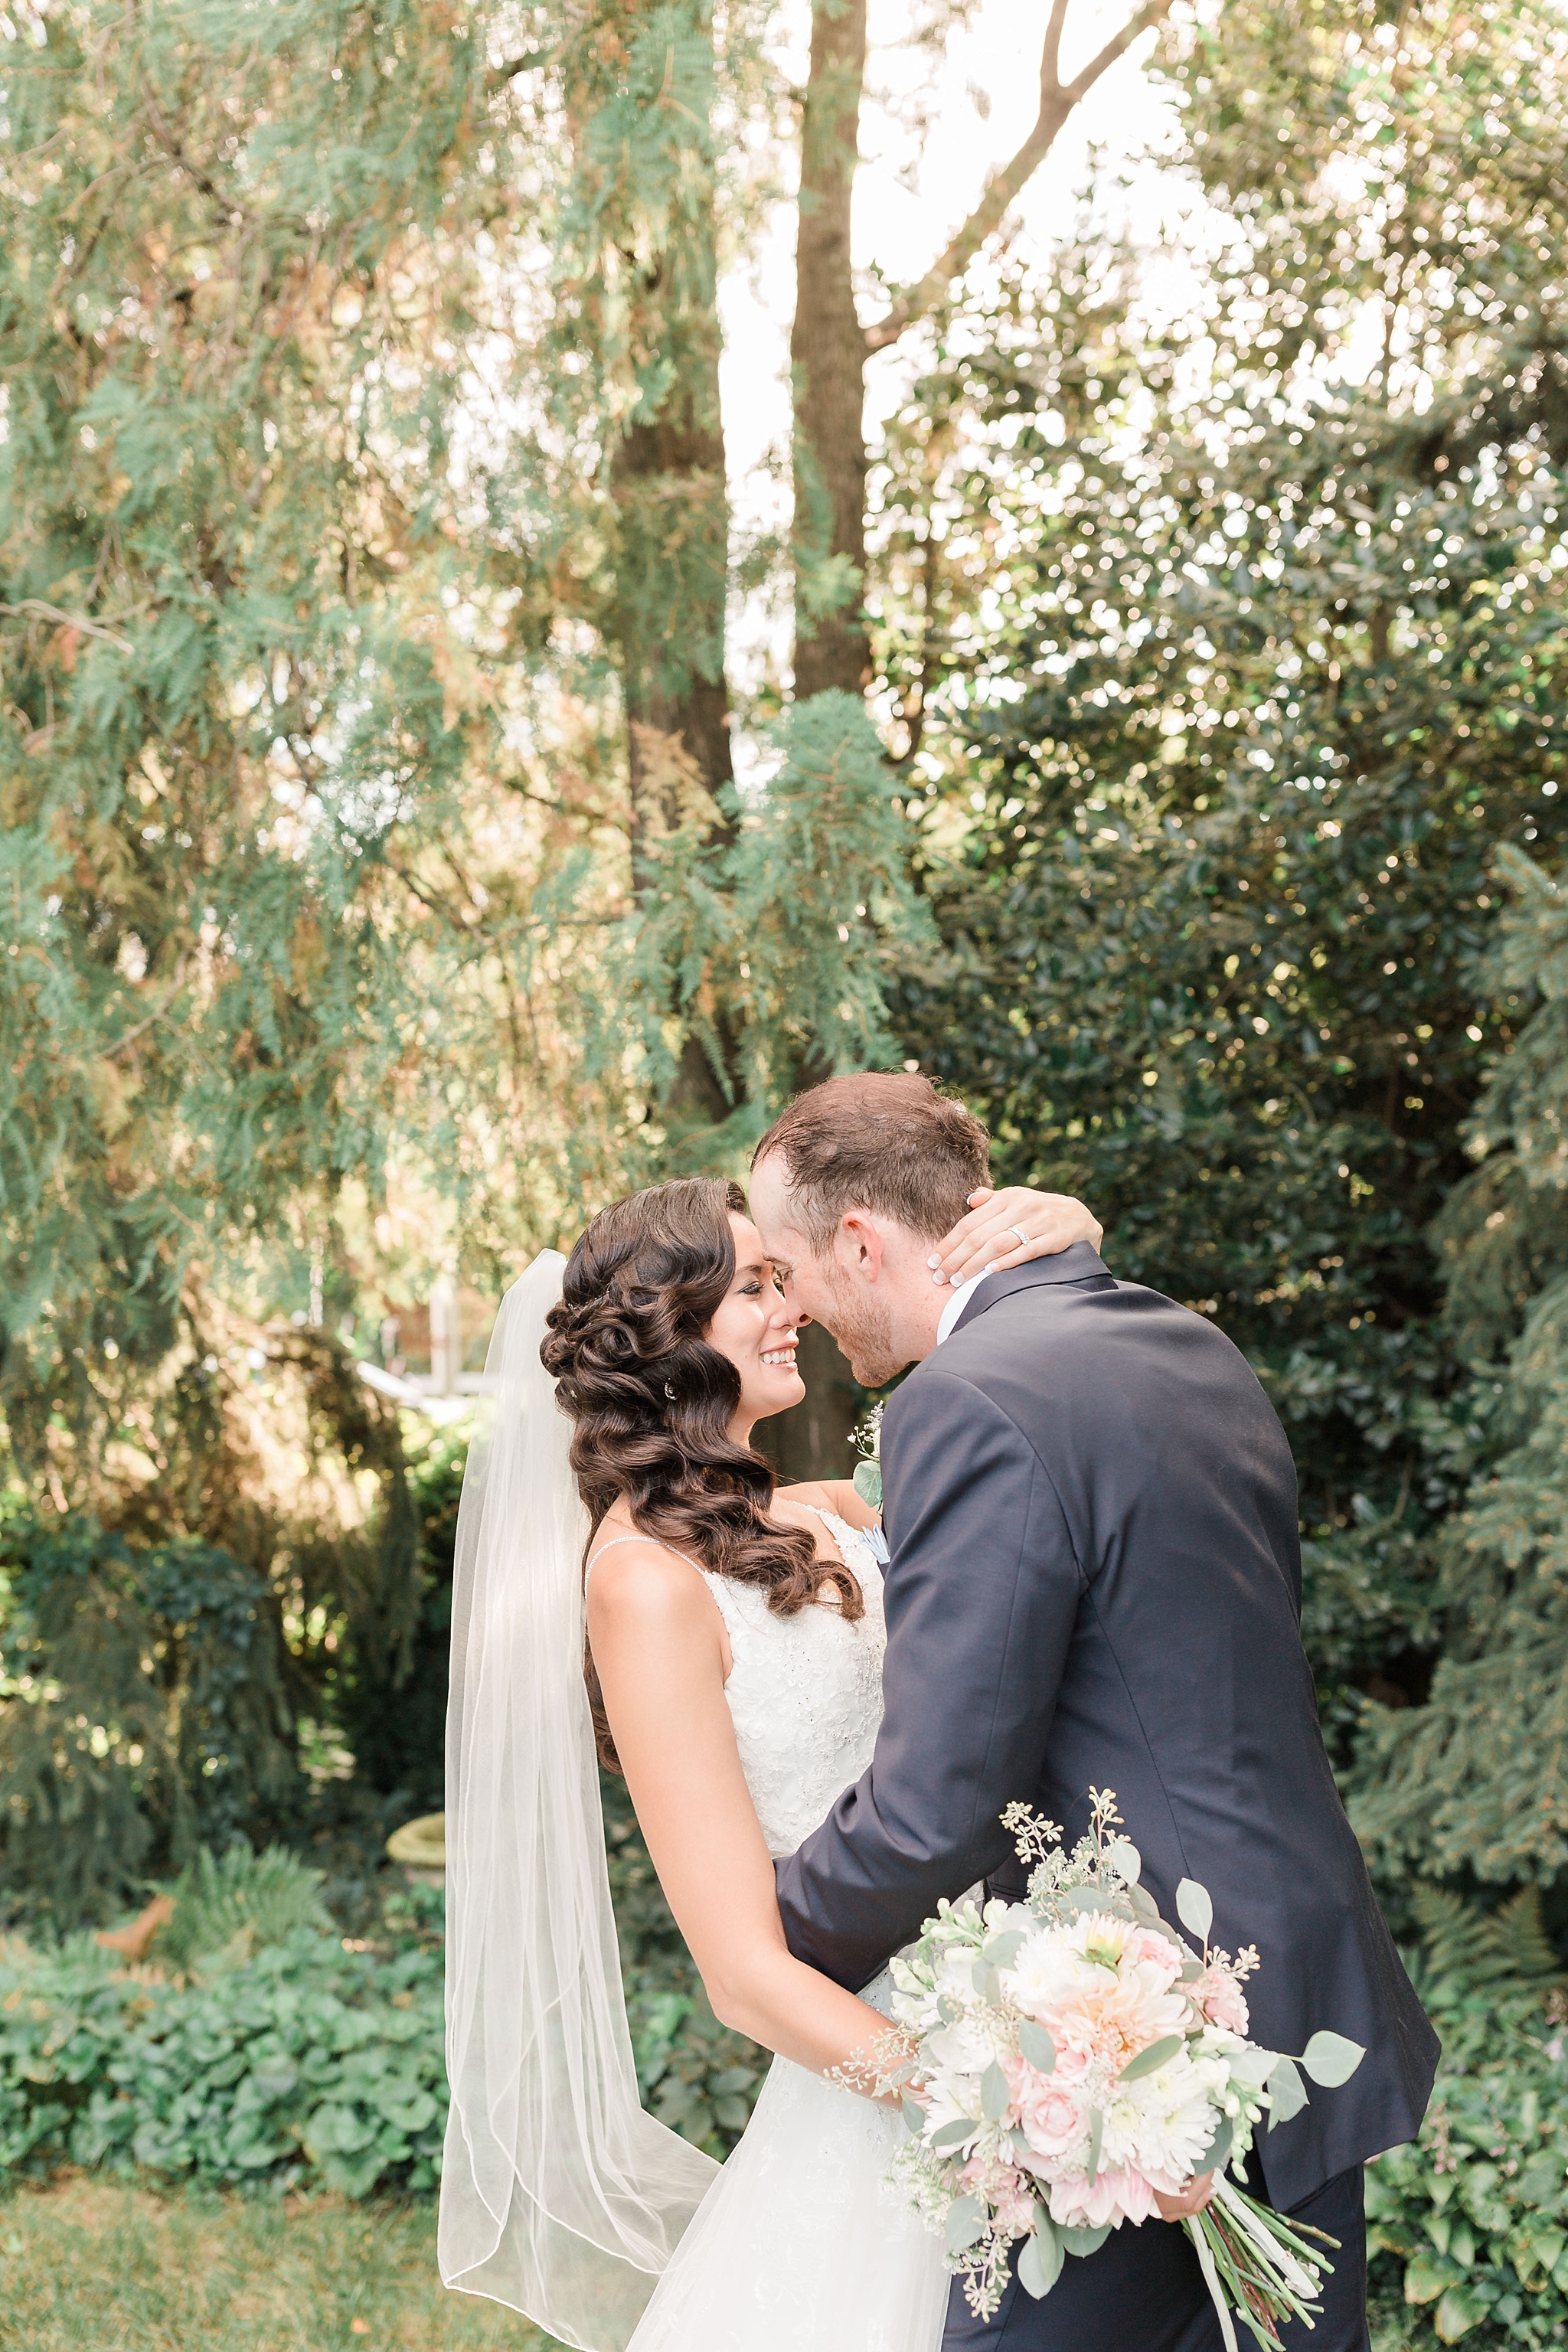 This elegant fall wedding at the Thomas Birkby House in Leesburg, VA was complete with vintage furniture and blush details. 